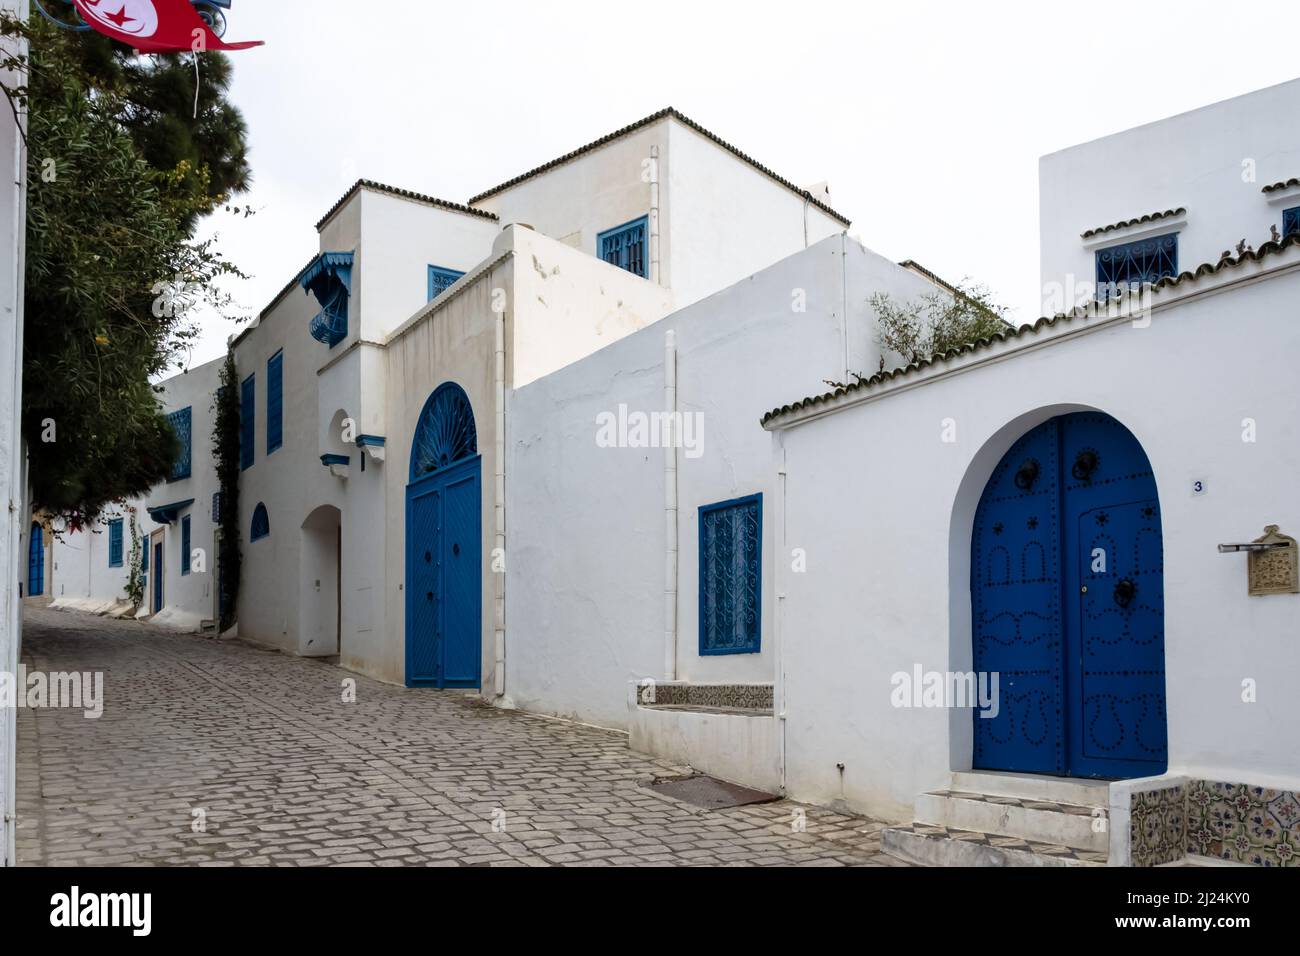 View of the typical houses and streets of the Mediterranean city of Sidi Bou Said, a town in northern Tunisia located about 20 km from Tunis Stock Photo